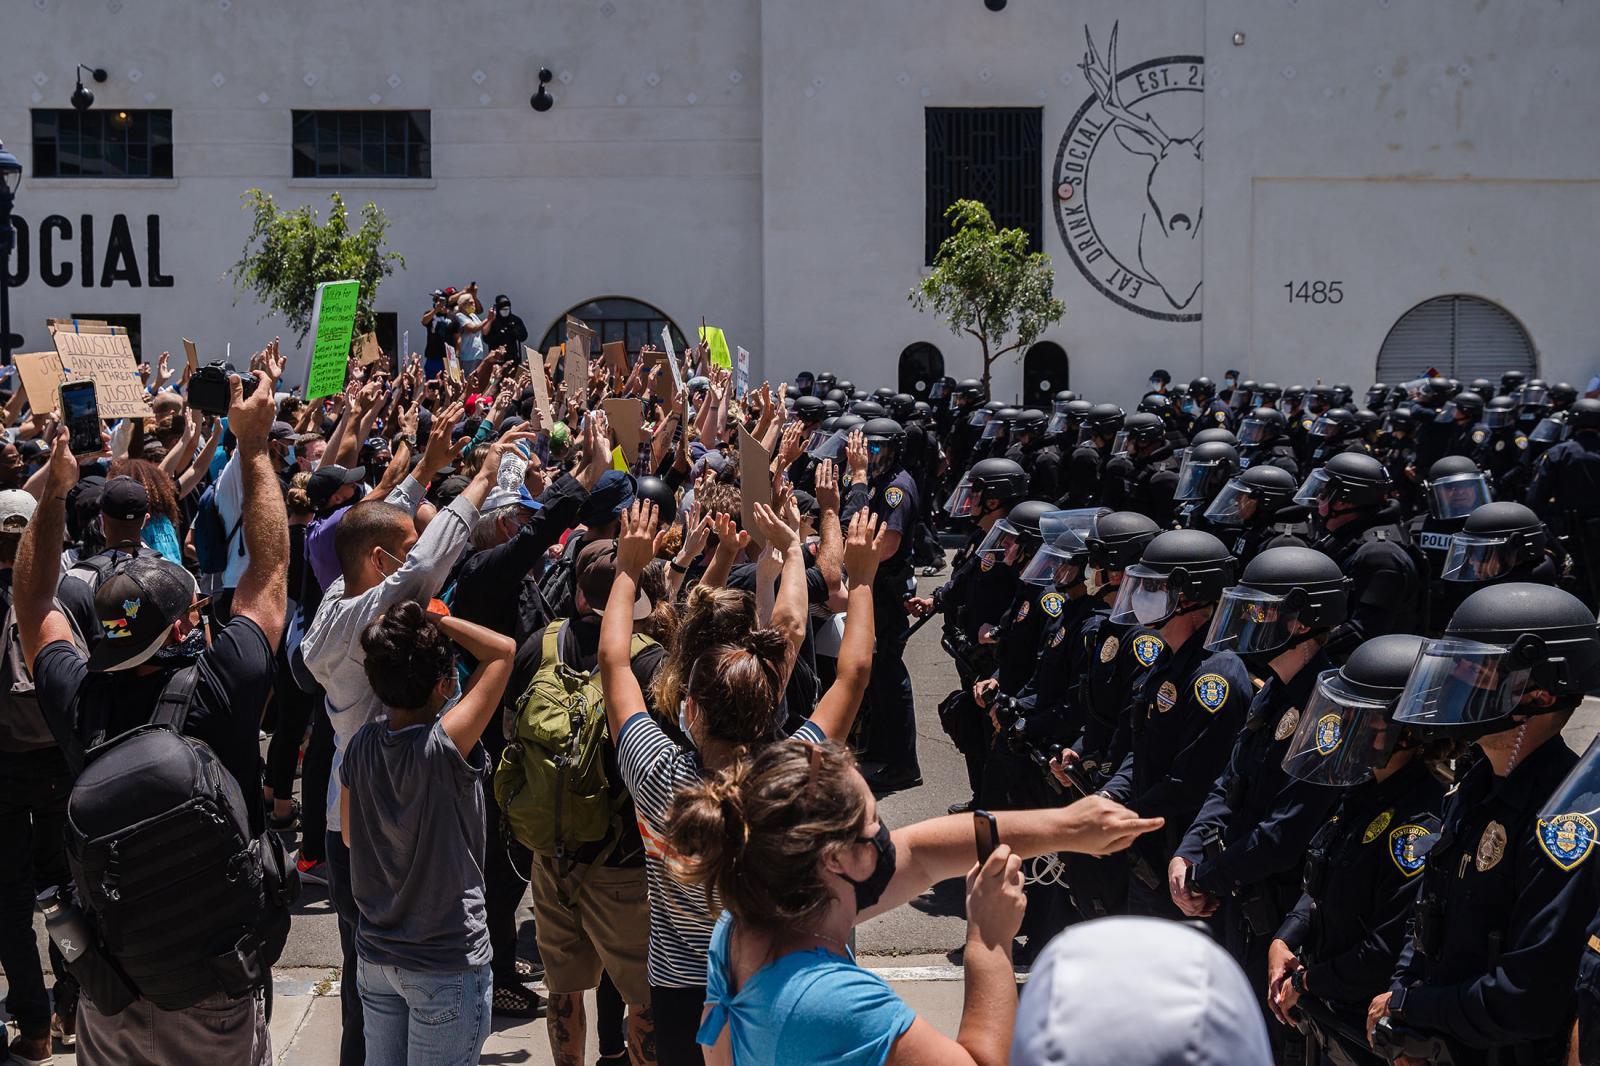 Demonstrators gather in front of the San Diego Police in downtown San Diego, California on May 31, 2020. Demonstrators march to protest against the death of George Floyd, an unarmed black man who died while while being arrested and pinned to the ground by the knee of a Minneapolis police officer.